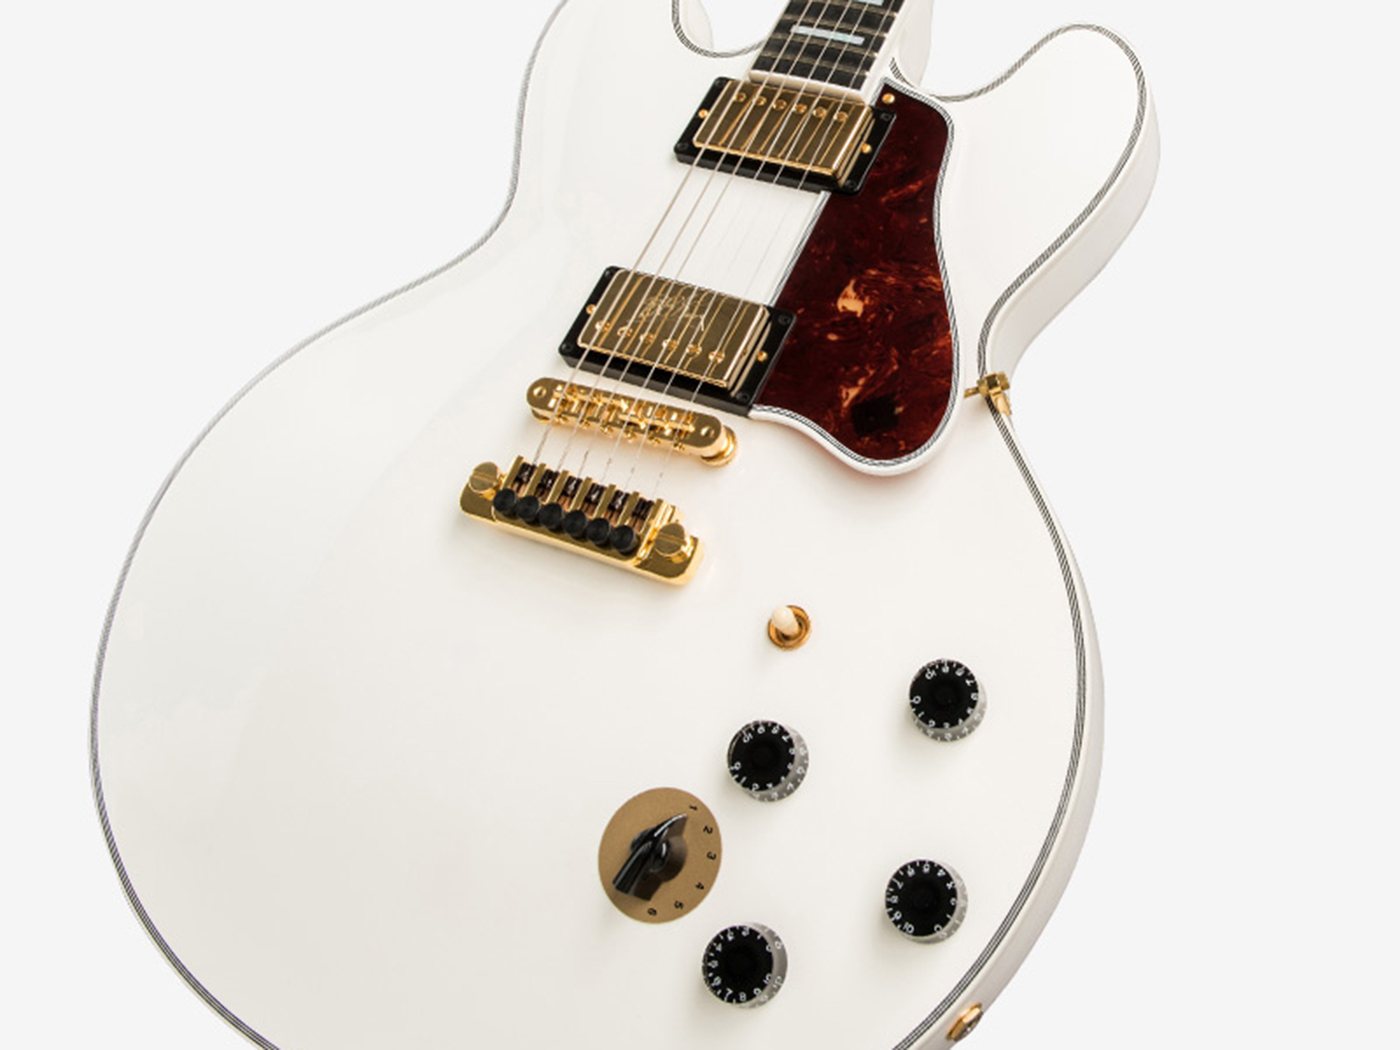 Gibson unveils the BB King Lucille 2019